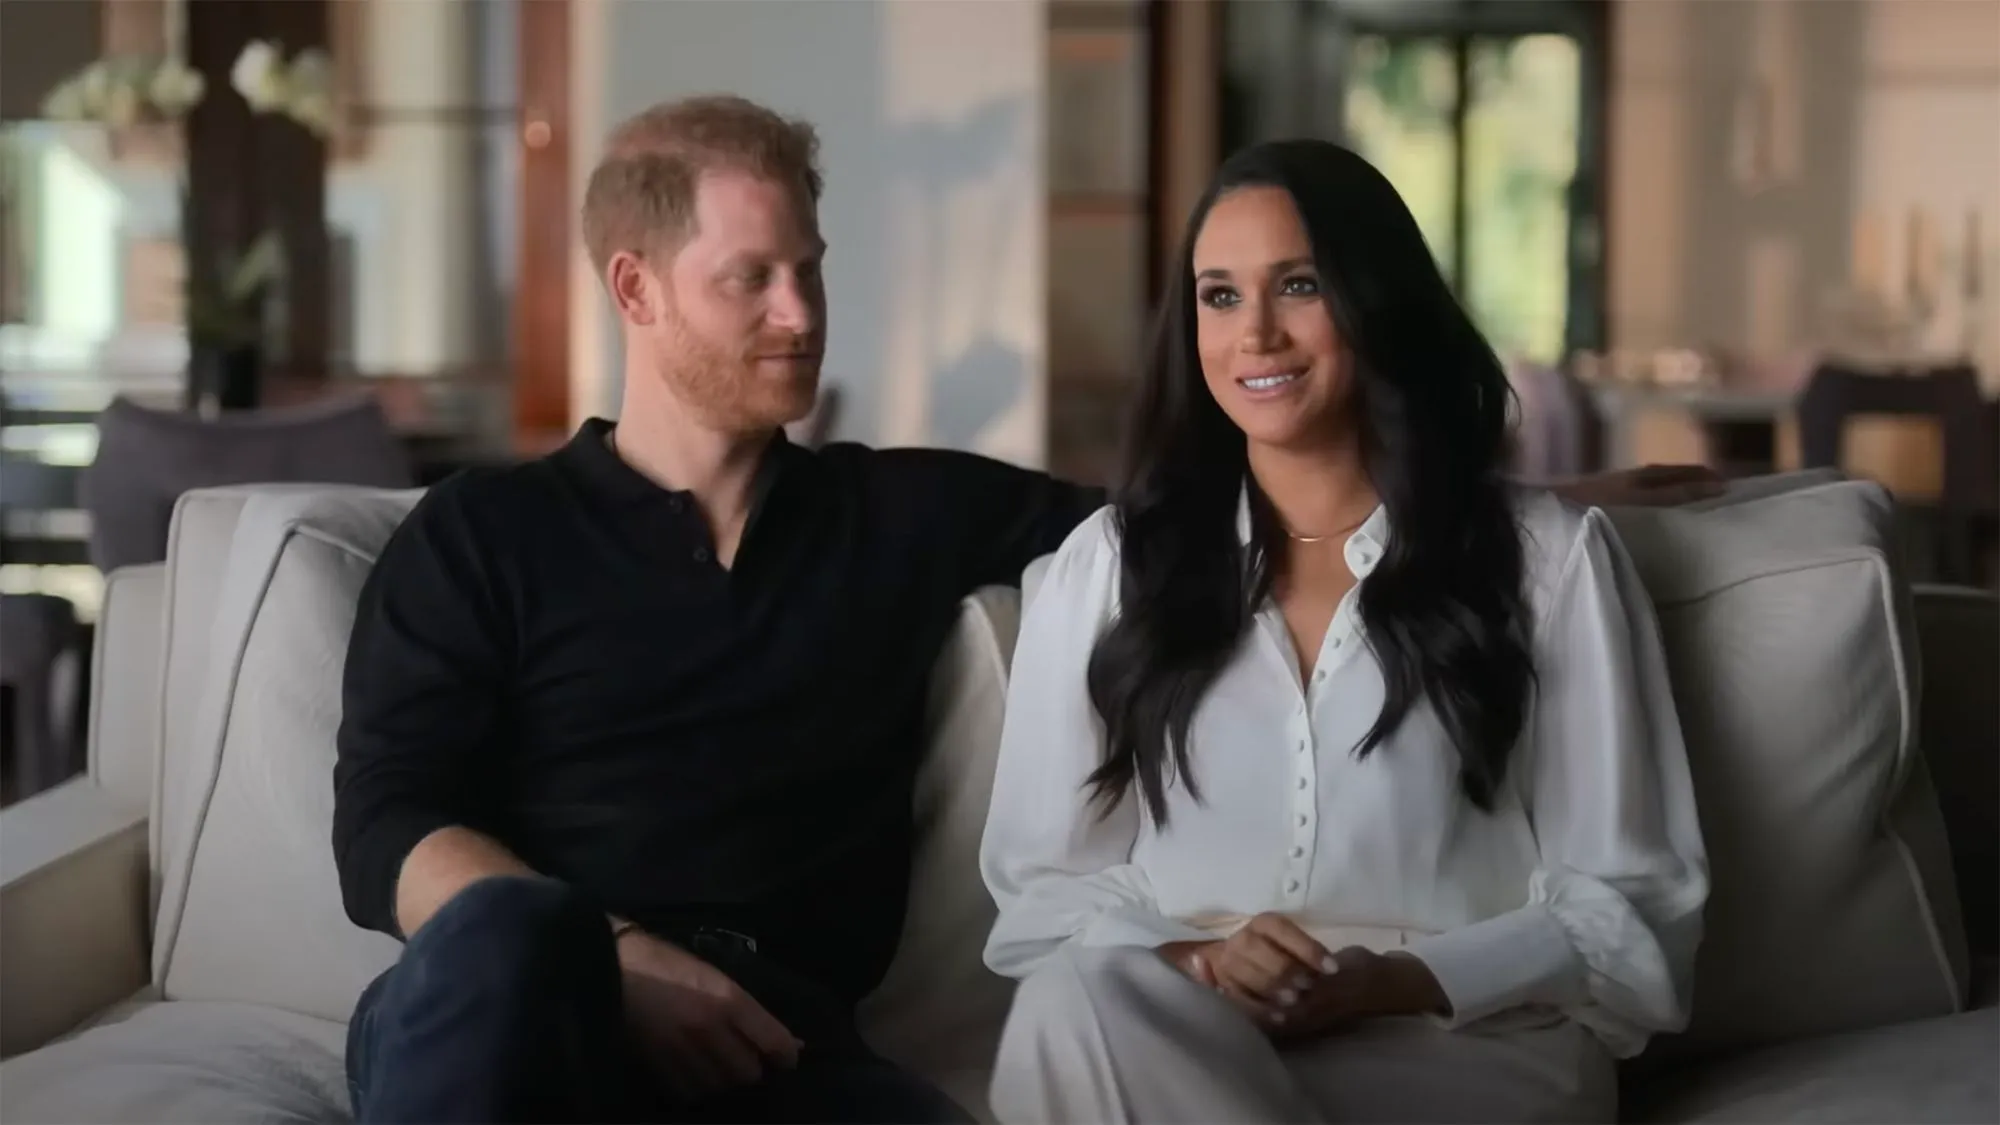 Netflix Ends Collaboration With Prince Harry And Meghan Markle After $100M Deal?

+2023